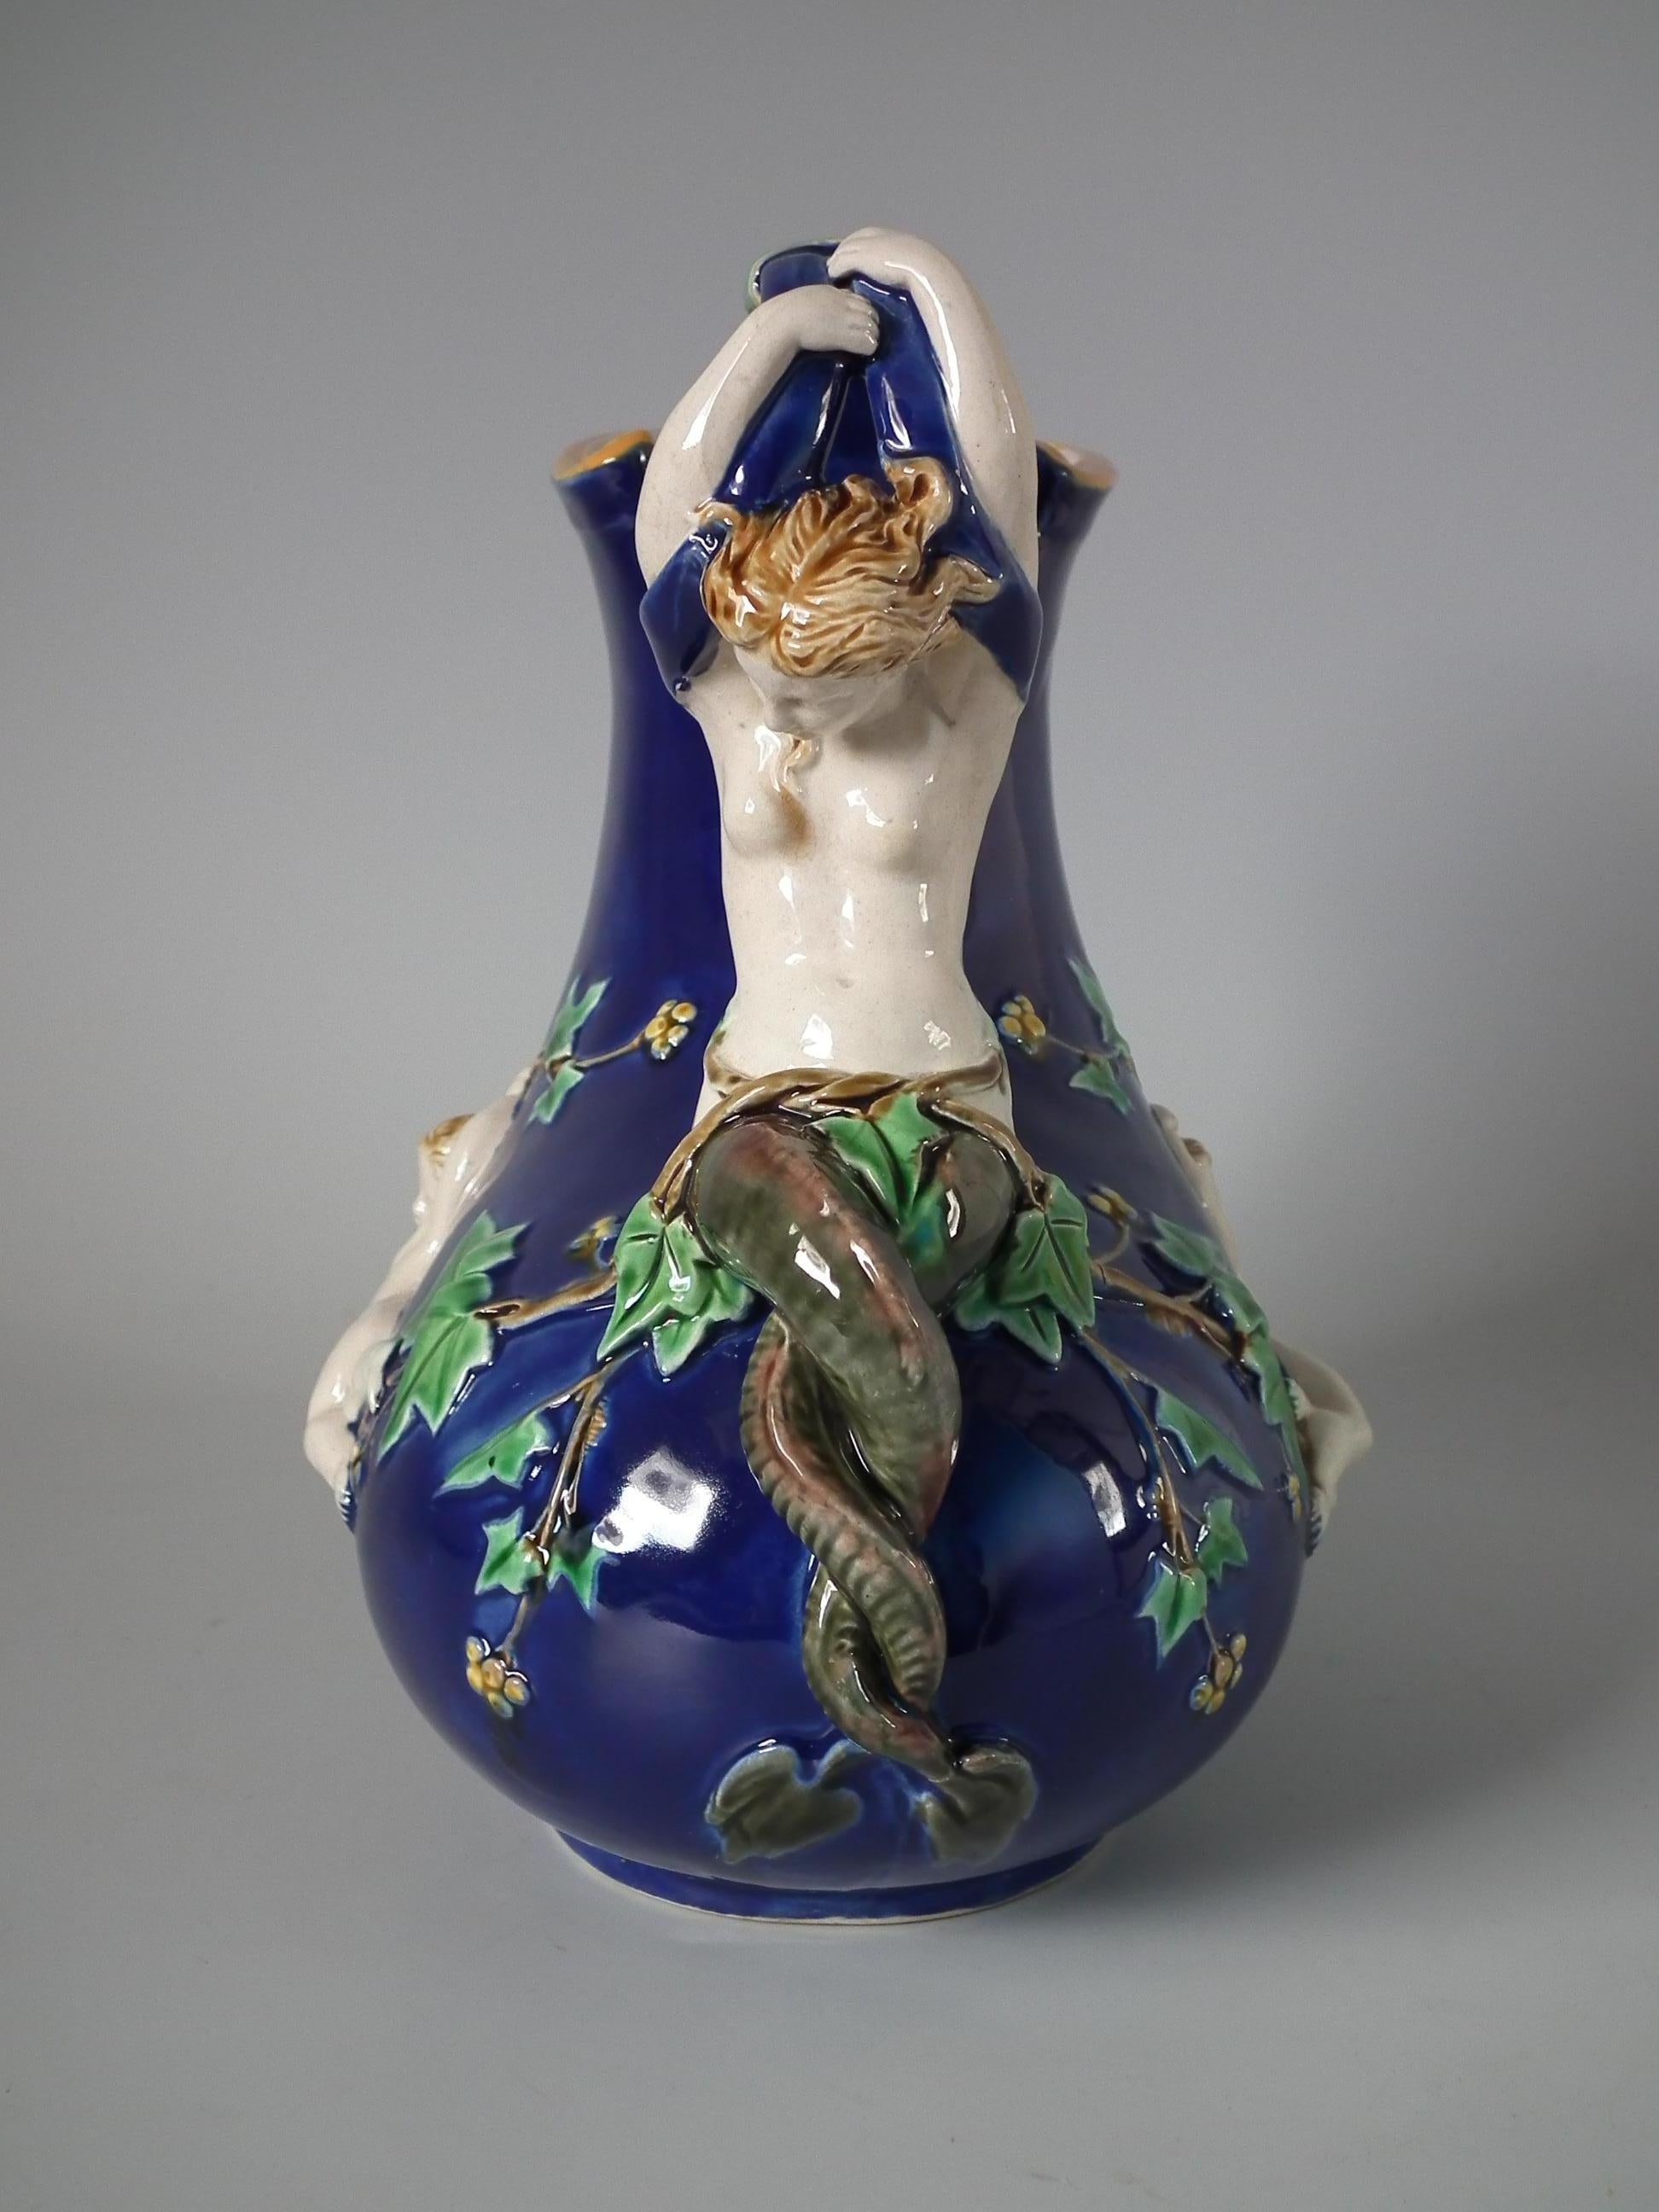 Minton Majolica jug/pitcher which features a handle in the form of a mermaid with entwined tail, a satyr mask below the spout and cherubs hanging from grape vines across the sides. Cobalt blue ground version. Colouration: cobalt blue, green, white,